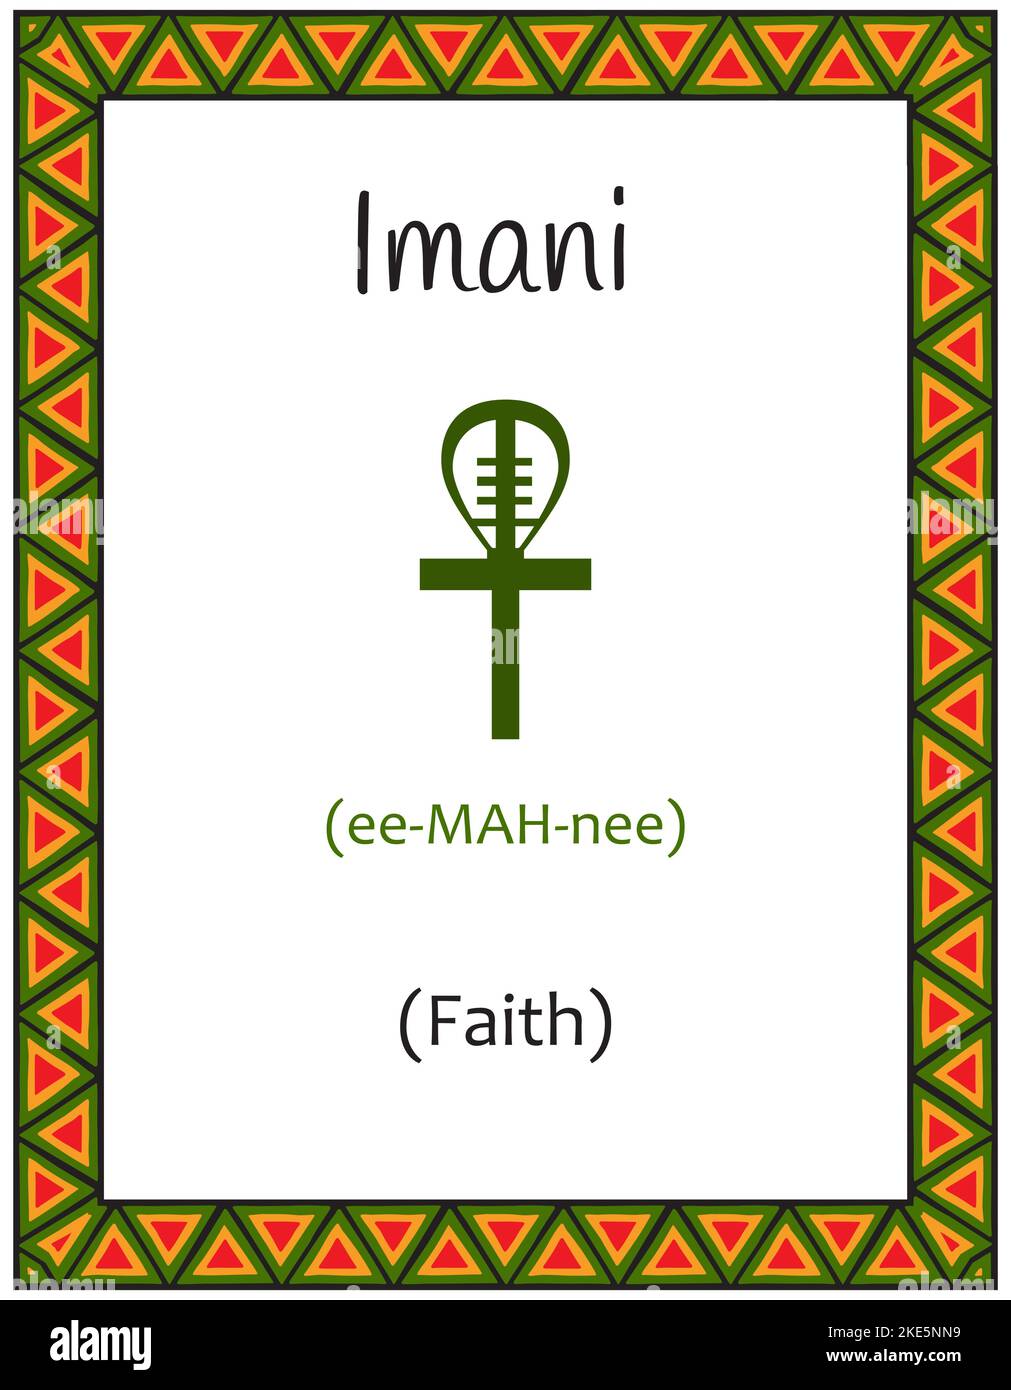 A card with one of the Kwanzaa principles. Symbol Imani means Faith in Swahili. Poster with an ethnic African pattern in traditional colors. Vector il Stock Vector